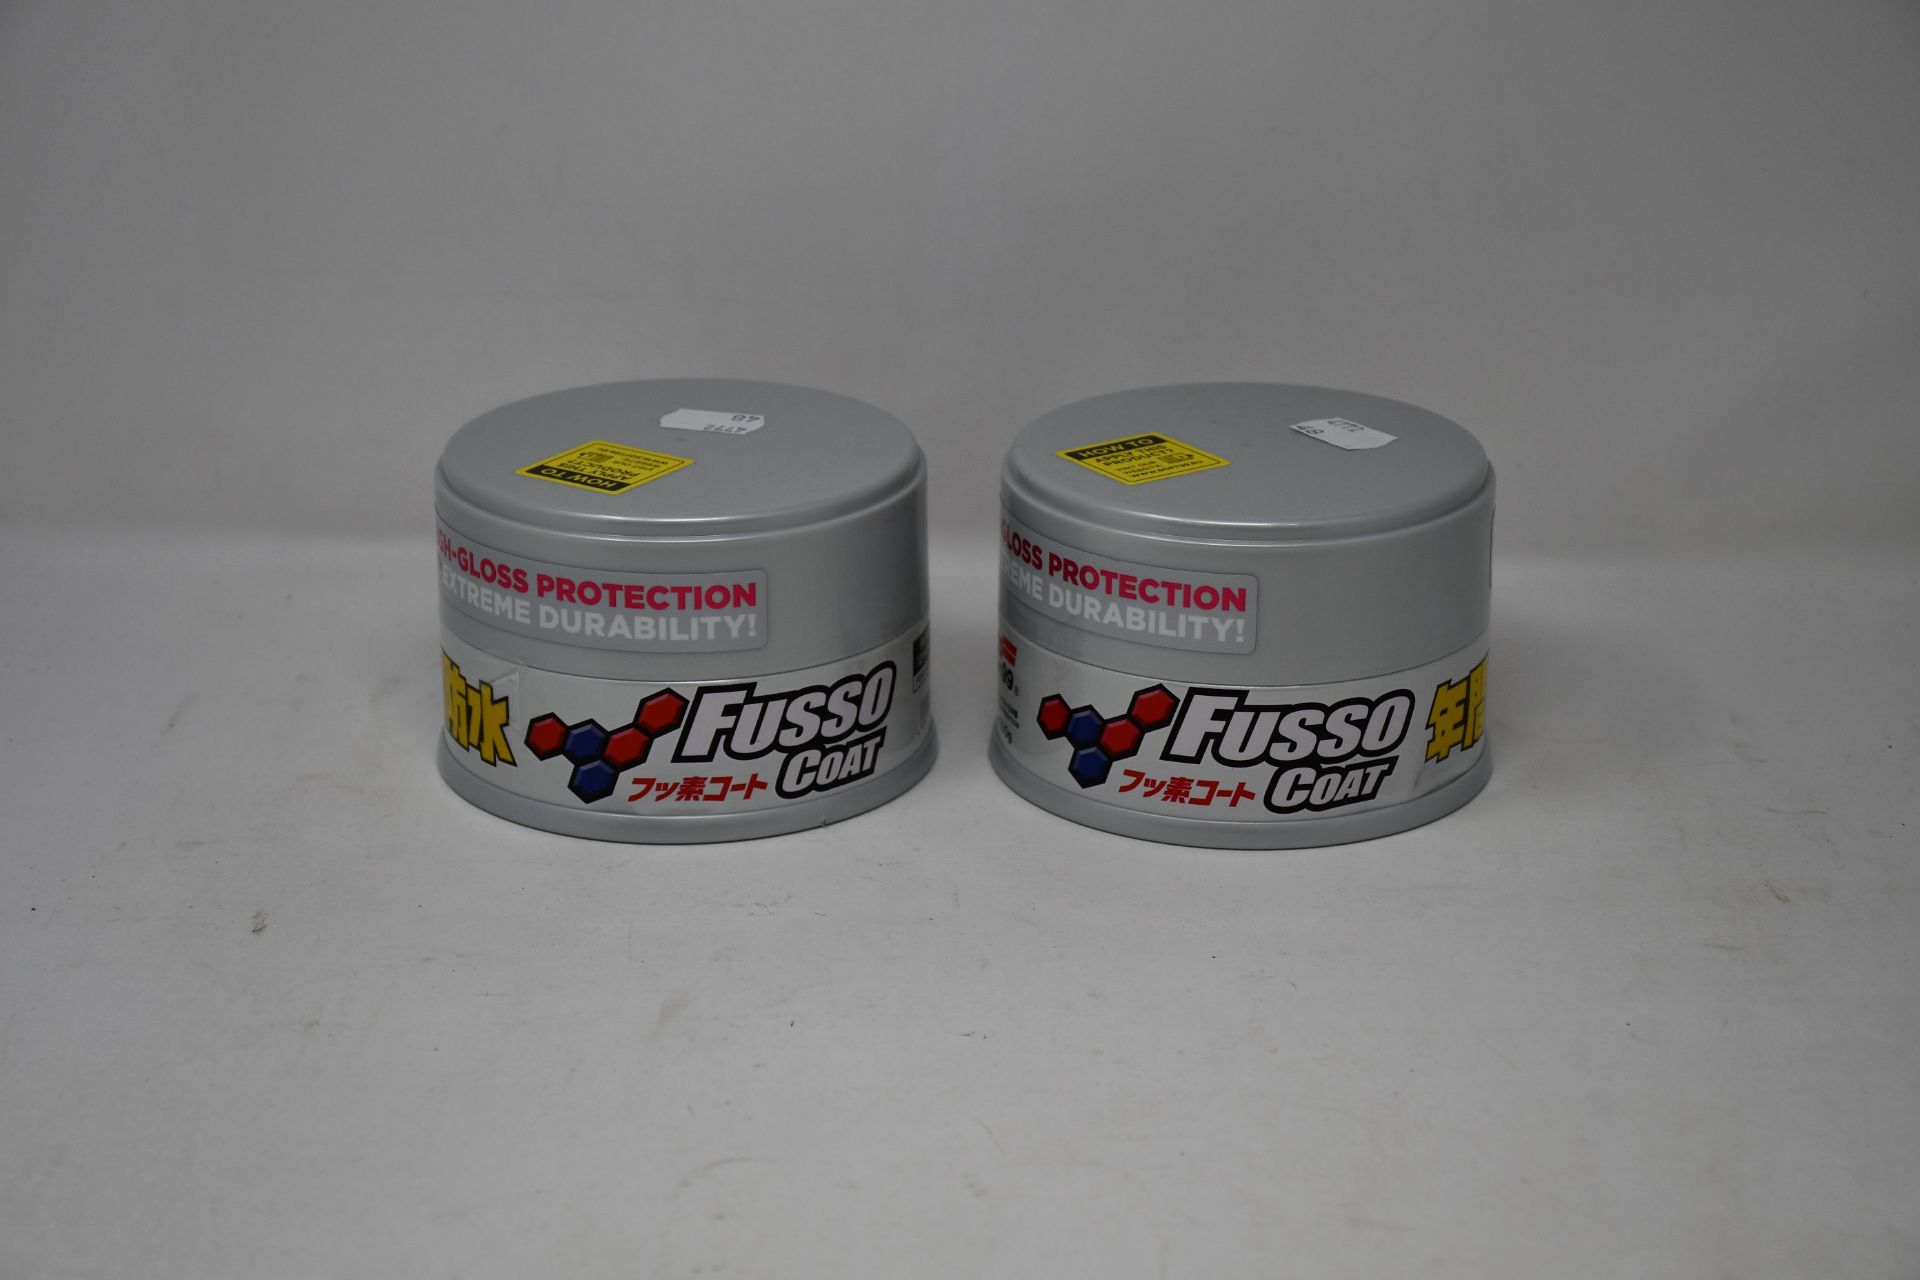 Five as new SOFT99 Fusso coat light car wax (Size: 200g).